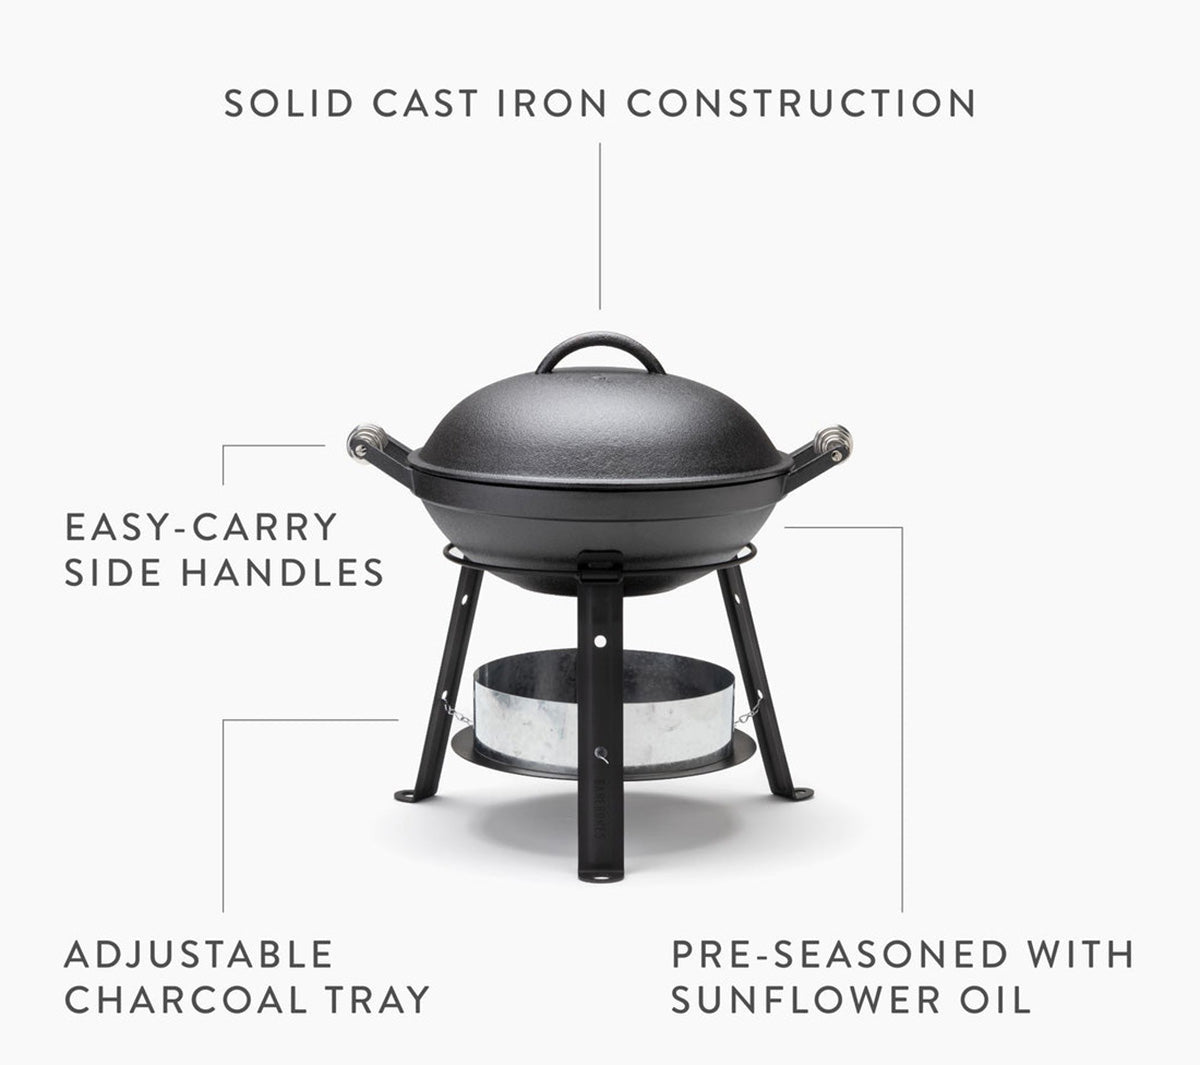 Barebones Living All-in-One Cast Iron Grill Features overview